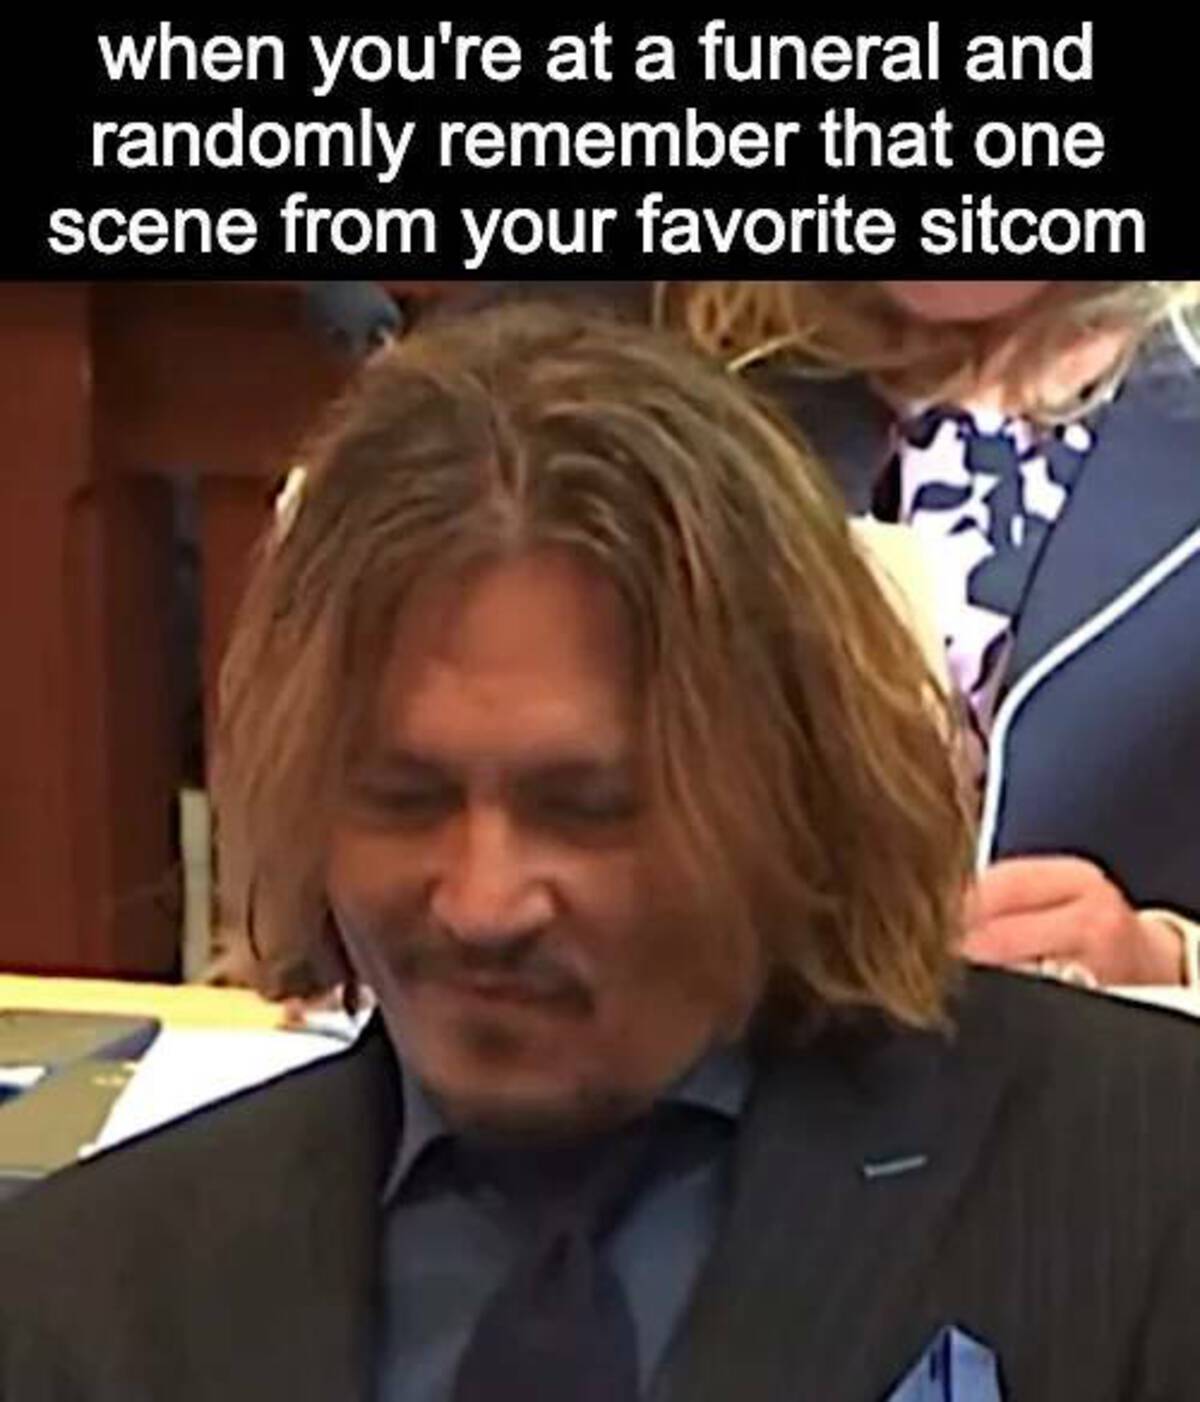 johnny depp smirking - when you're at a funeral and randomly remember that one scene from your favorite sitcom